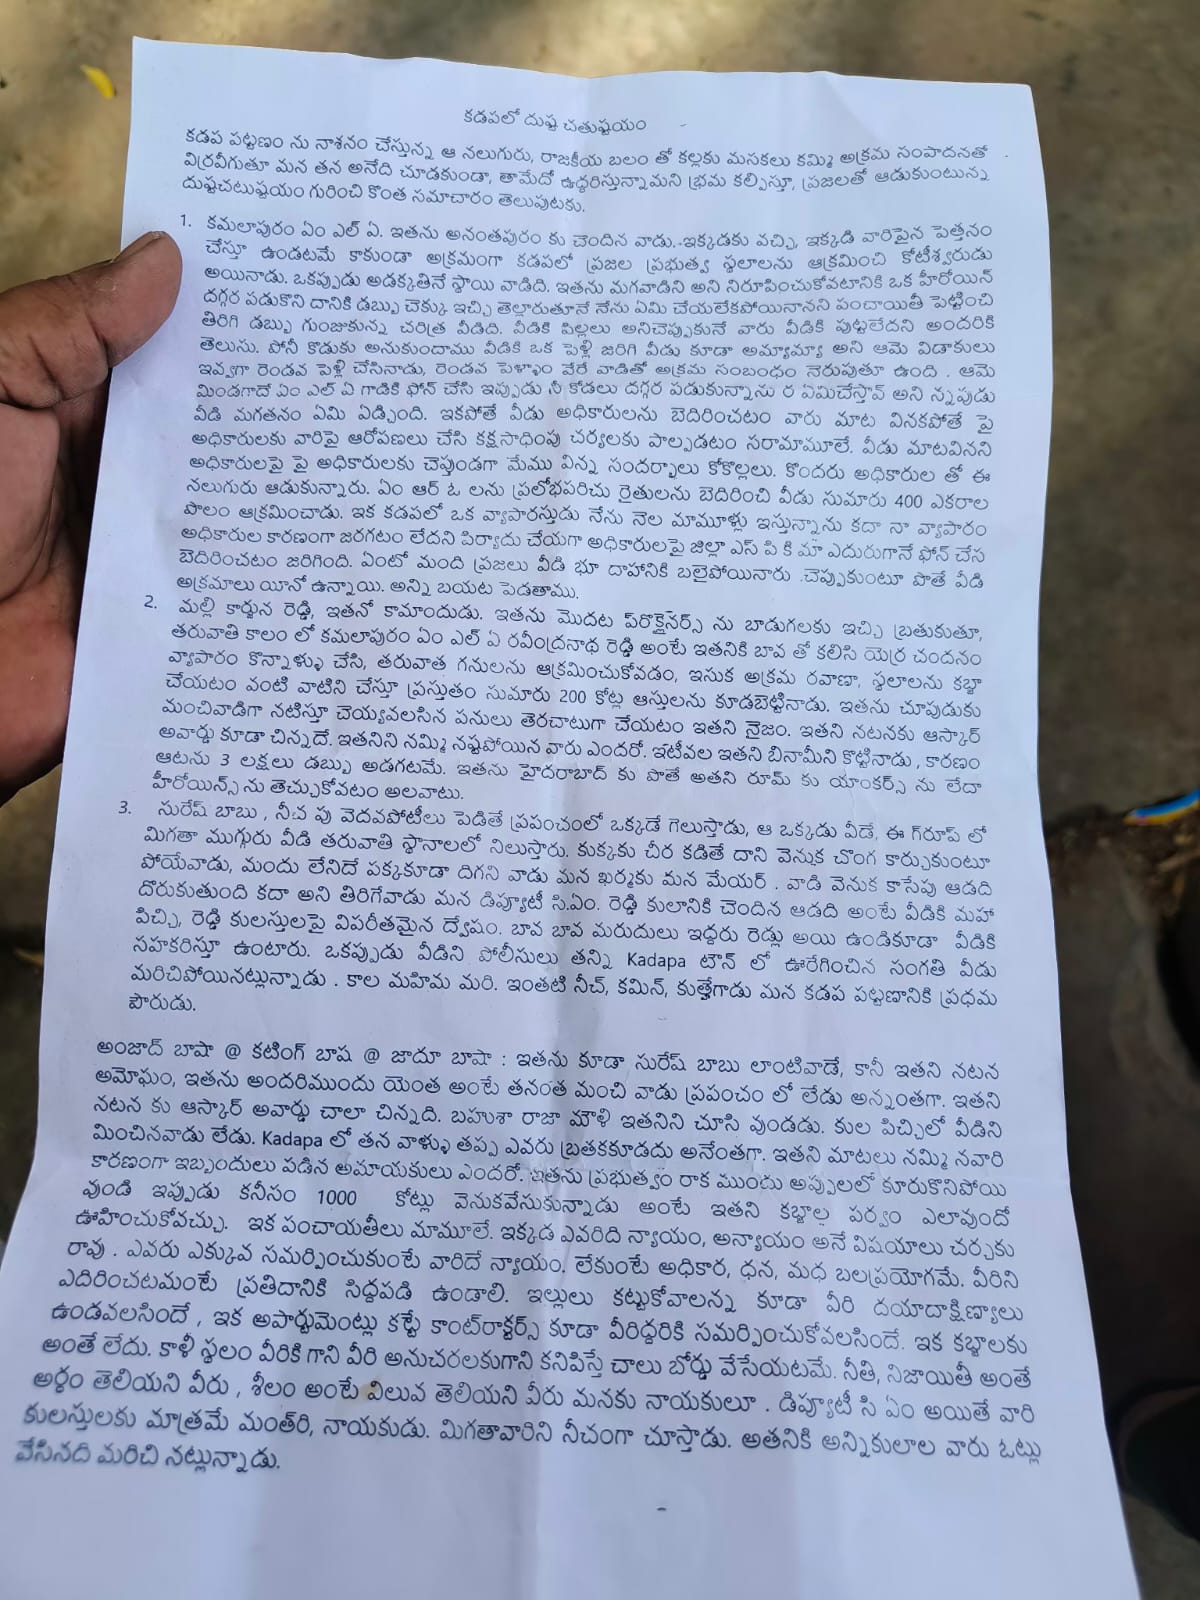 A collection of pamphlets in the name of four YCP leaders